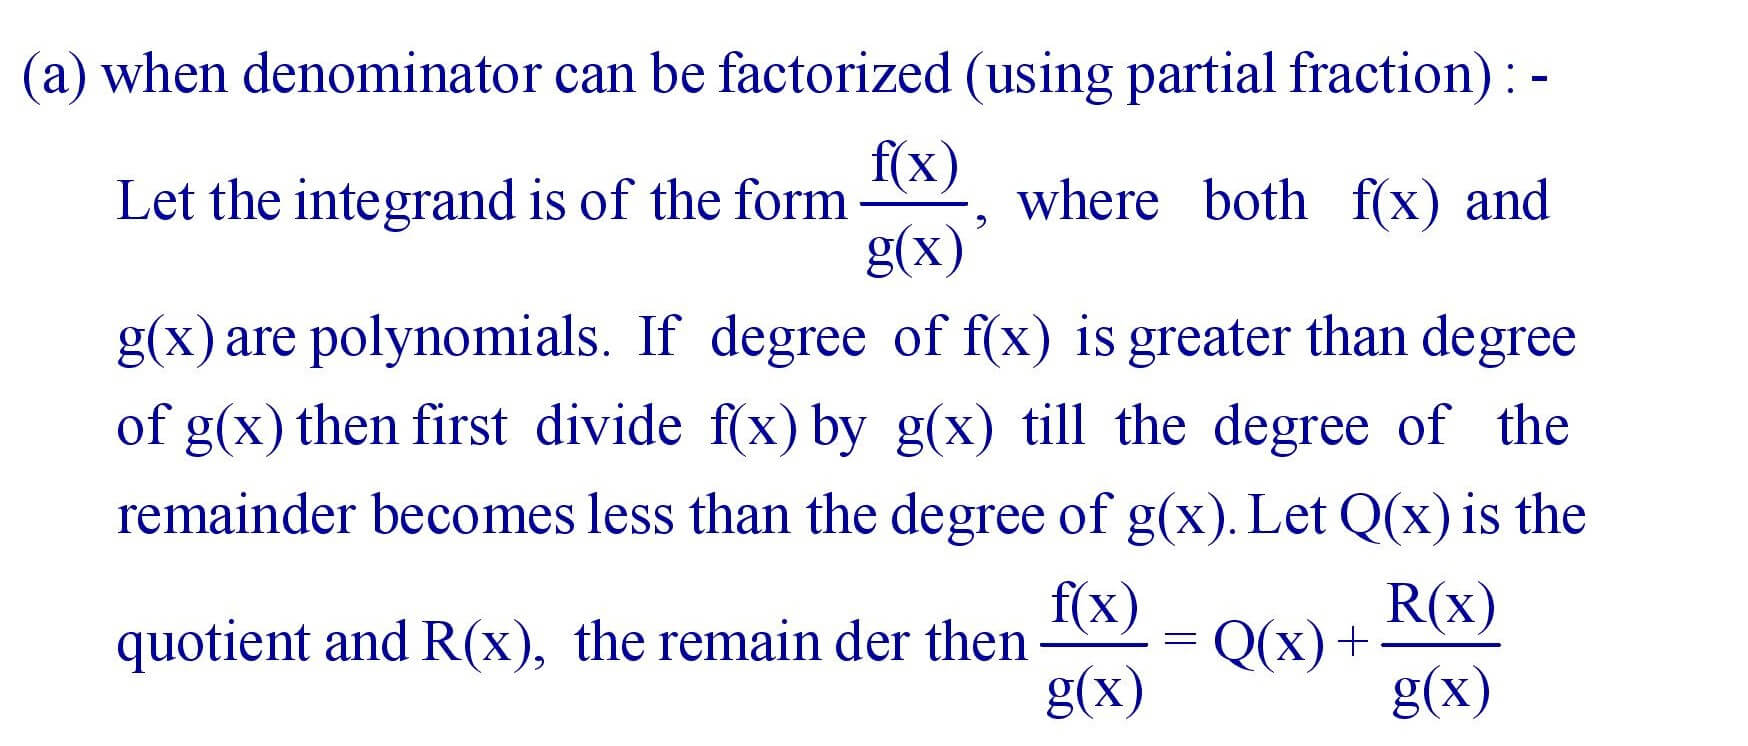 Integration of rational functions